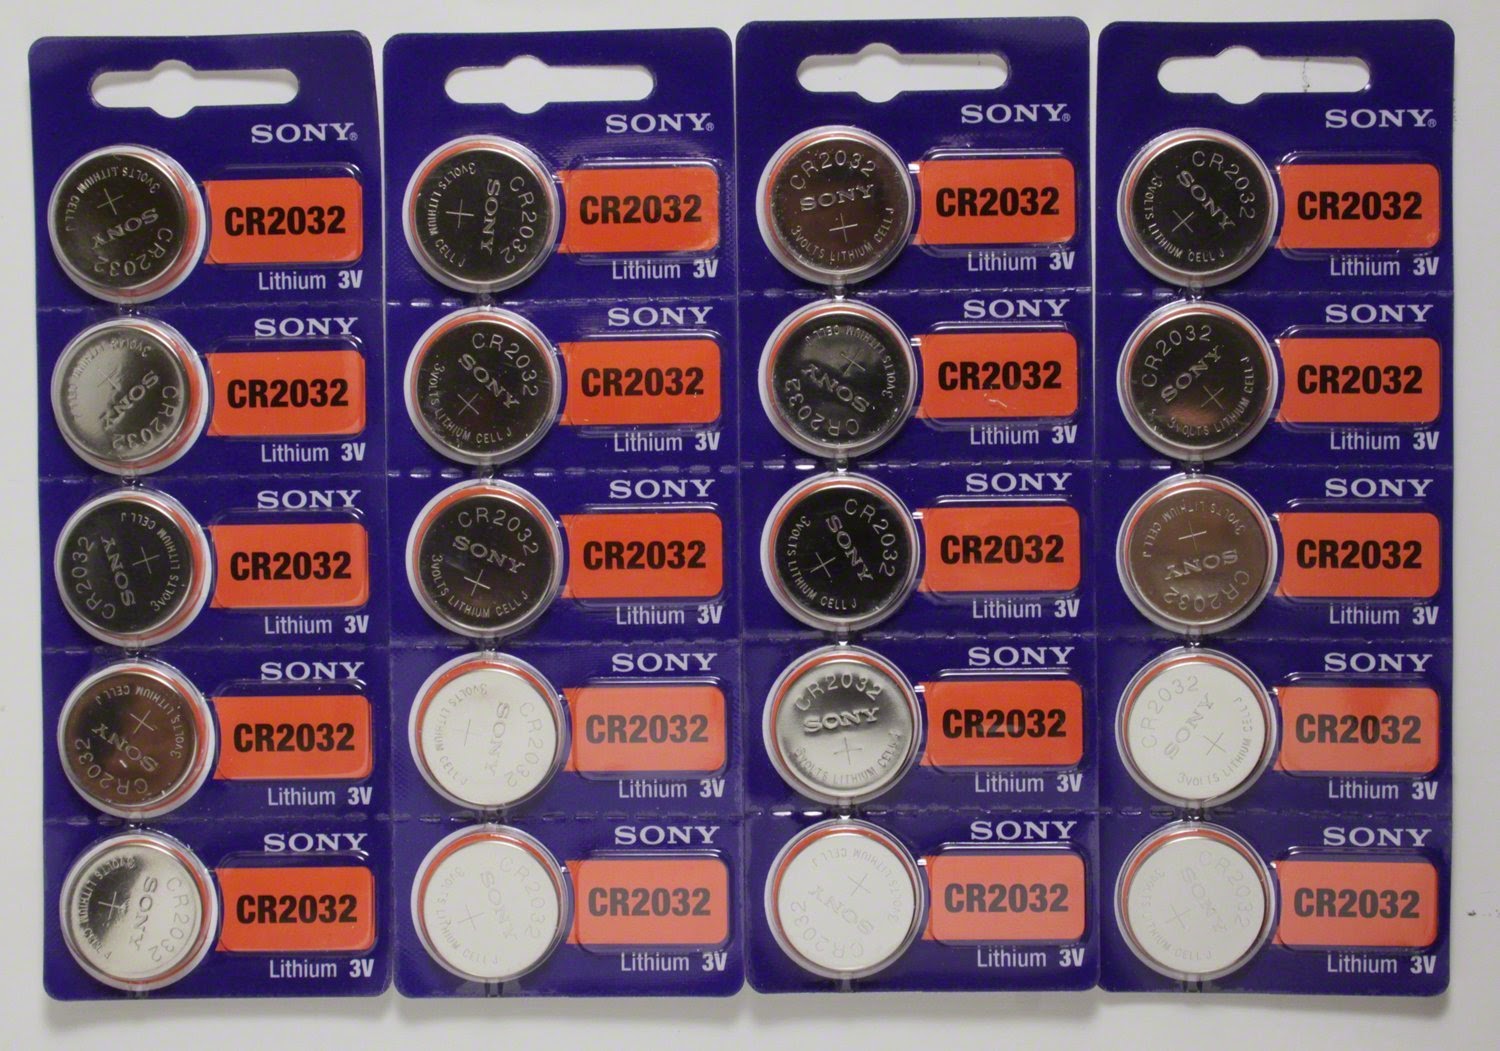 Cr2032 Sony 3V Lithium CR2032 Batteries (4 Blisters of 5), 20 Cells